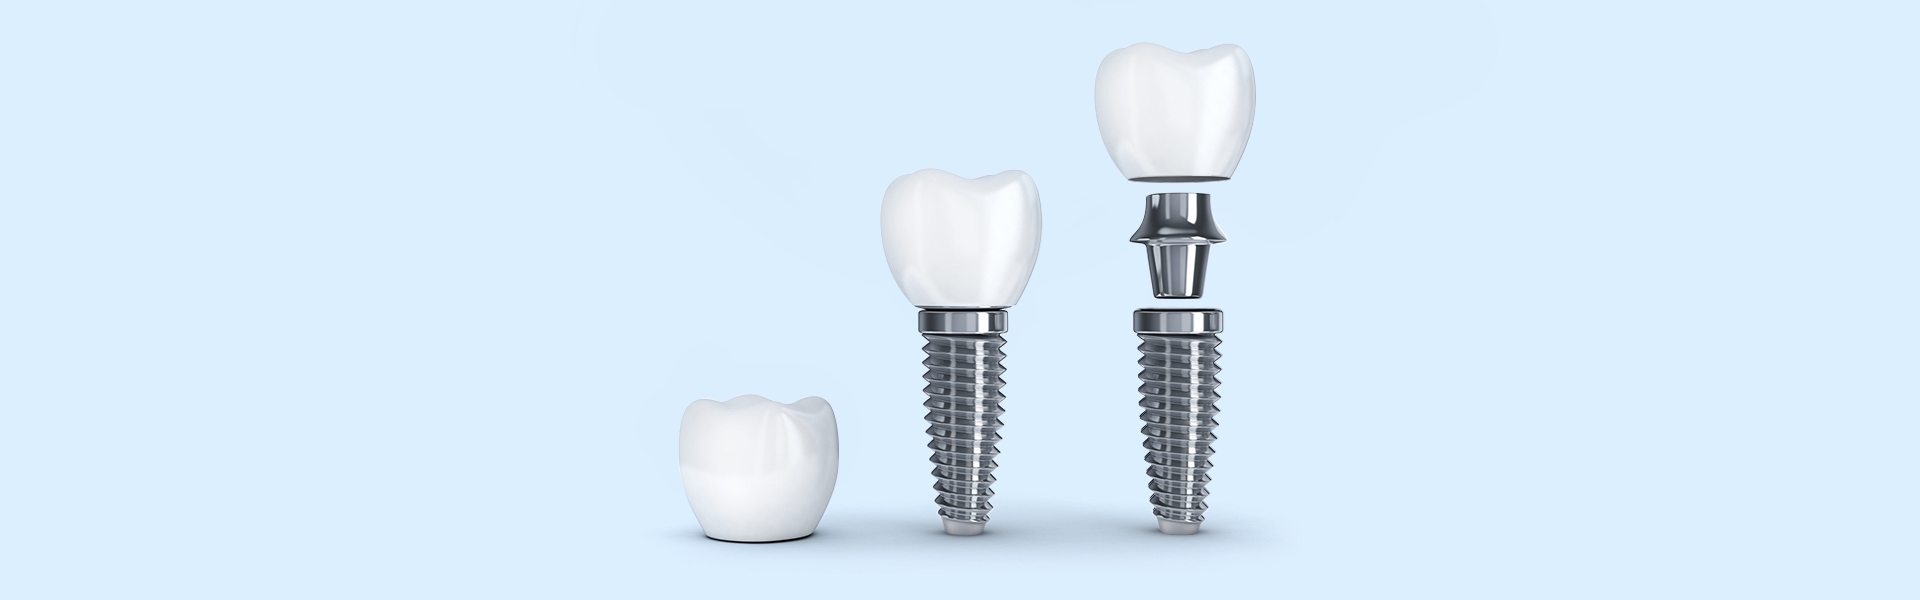 Teeth Replacement Options Whether Single or Multiple Not Challenging to Find